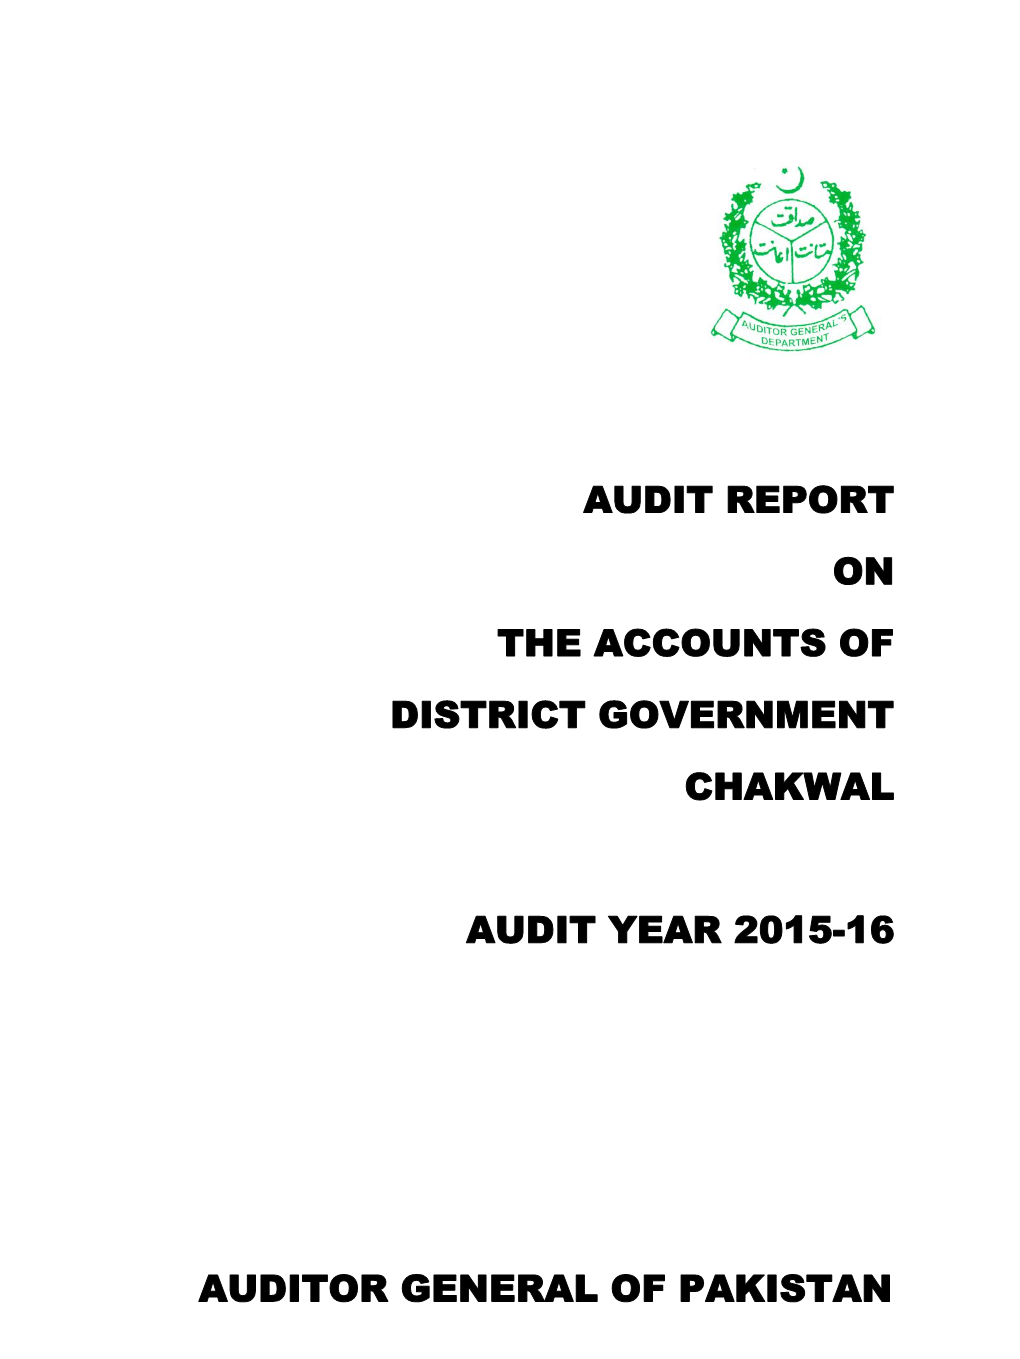 Audit Report on the Accounts of District Government Chakwal